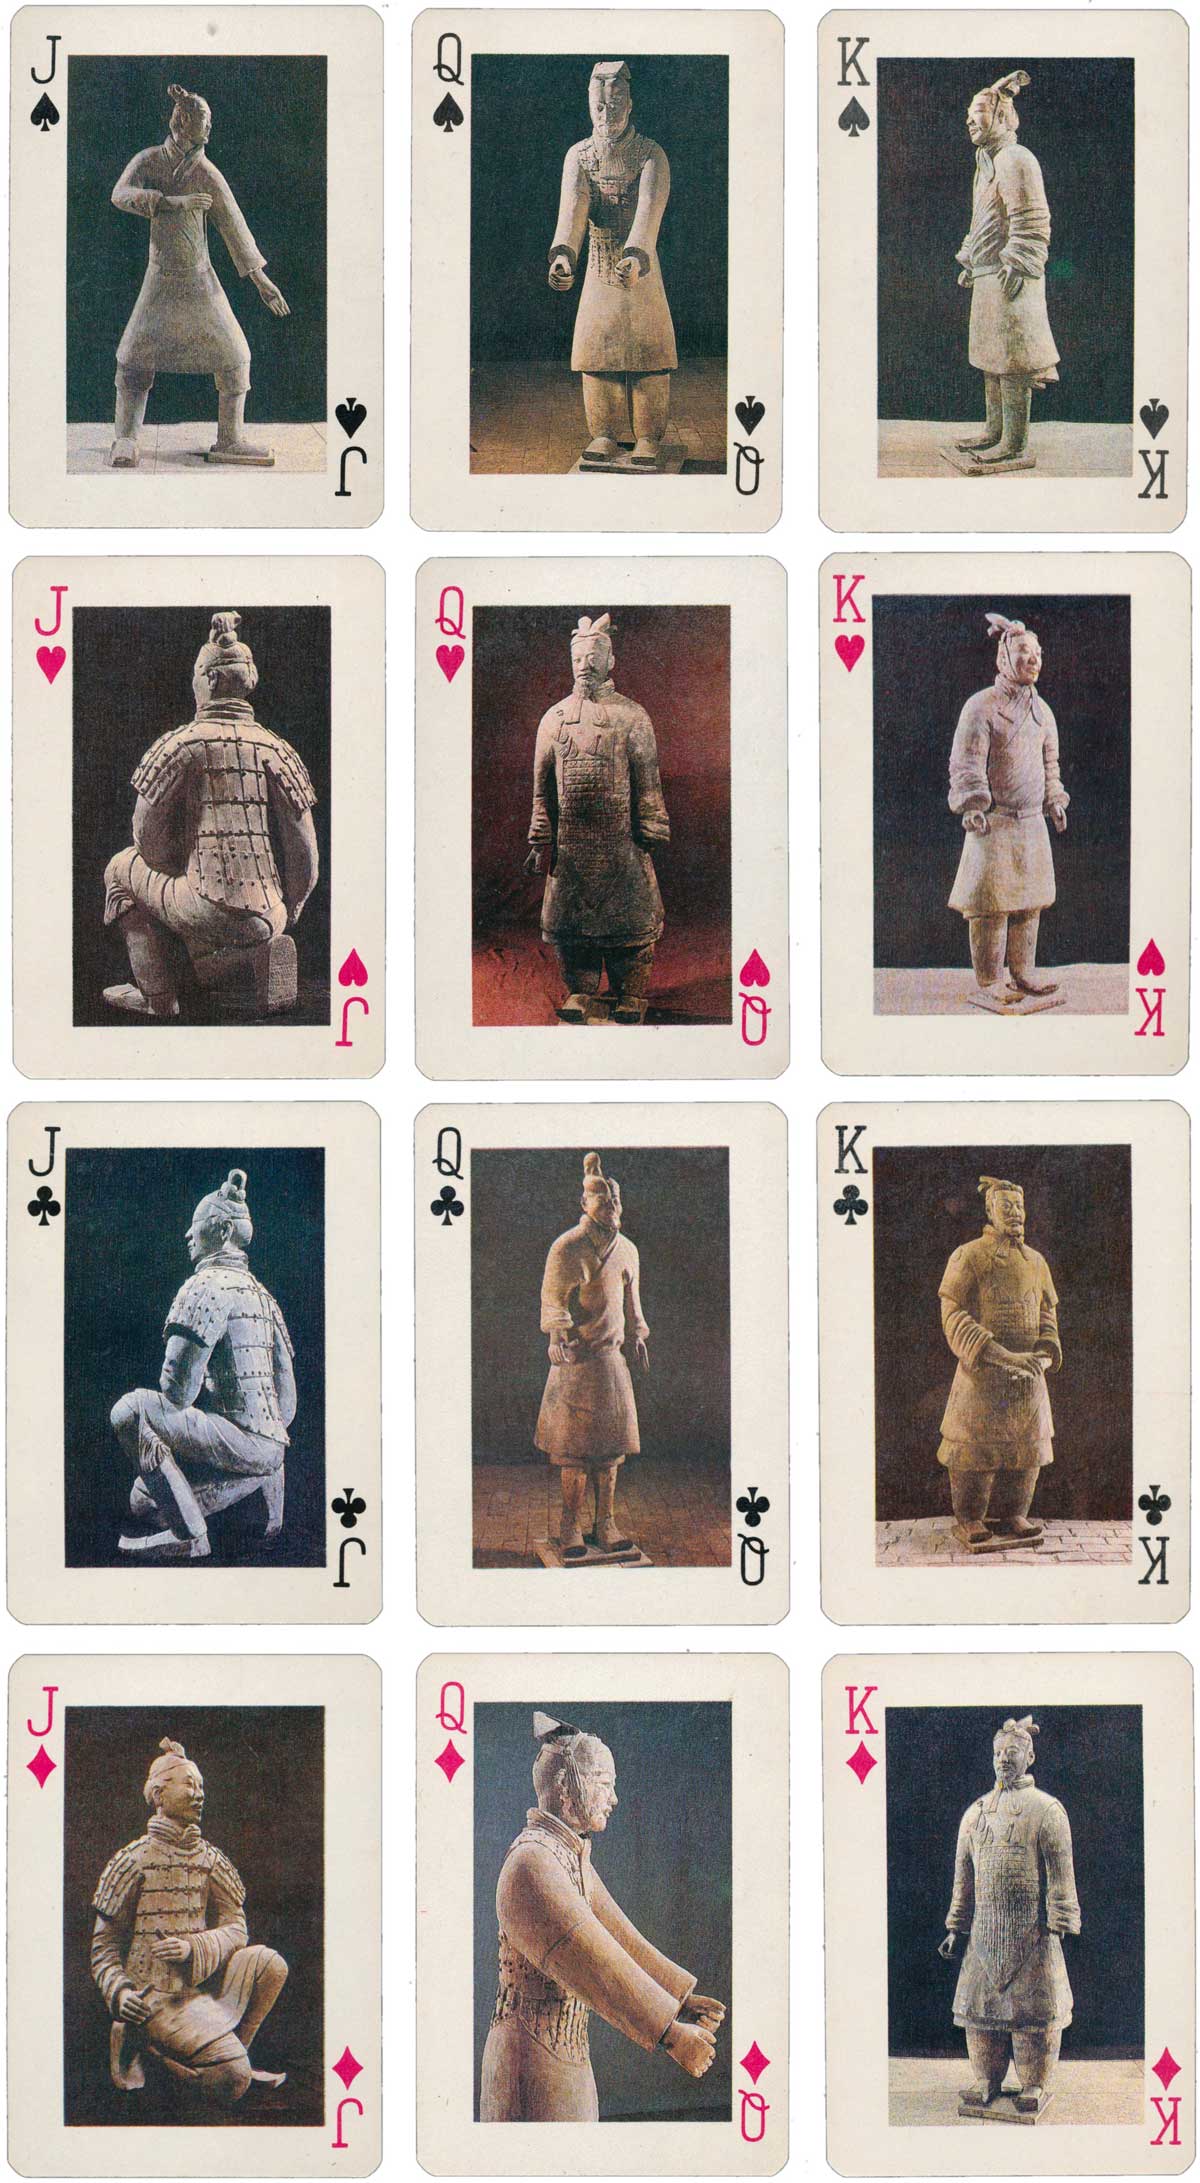 Post Playing Cards featuring photos of the terracotta army